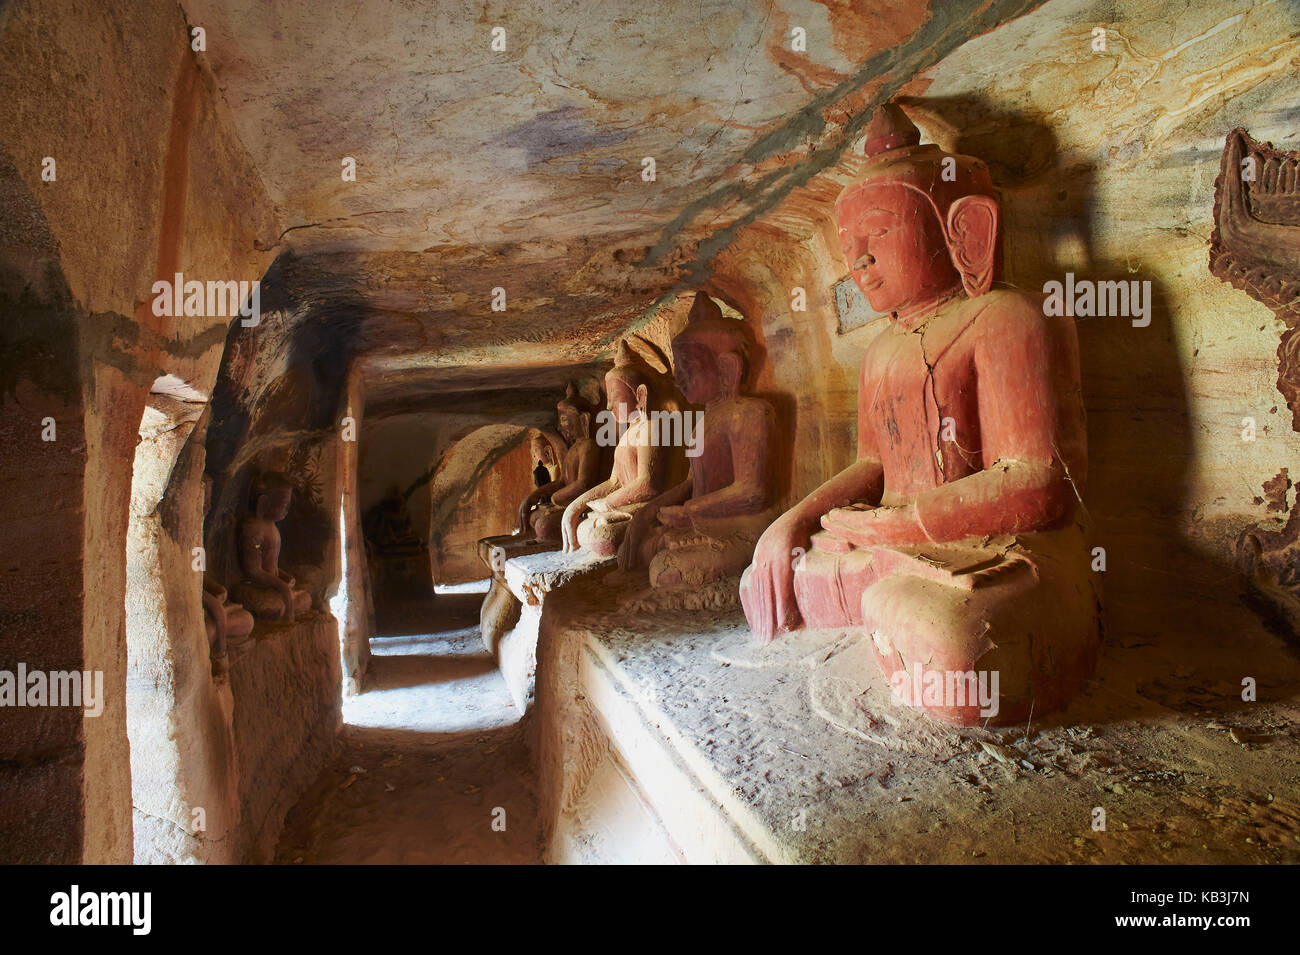 Buddha statues from the 15th century, Myanmar, Asia, Stock Photo